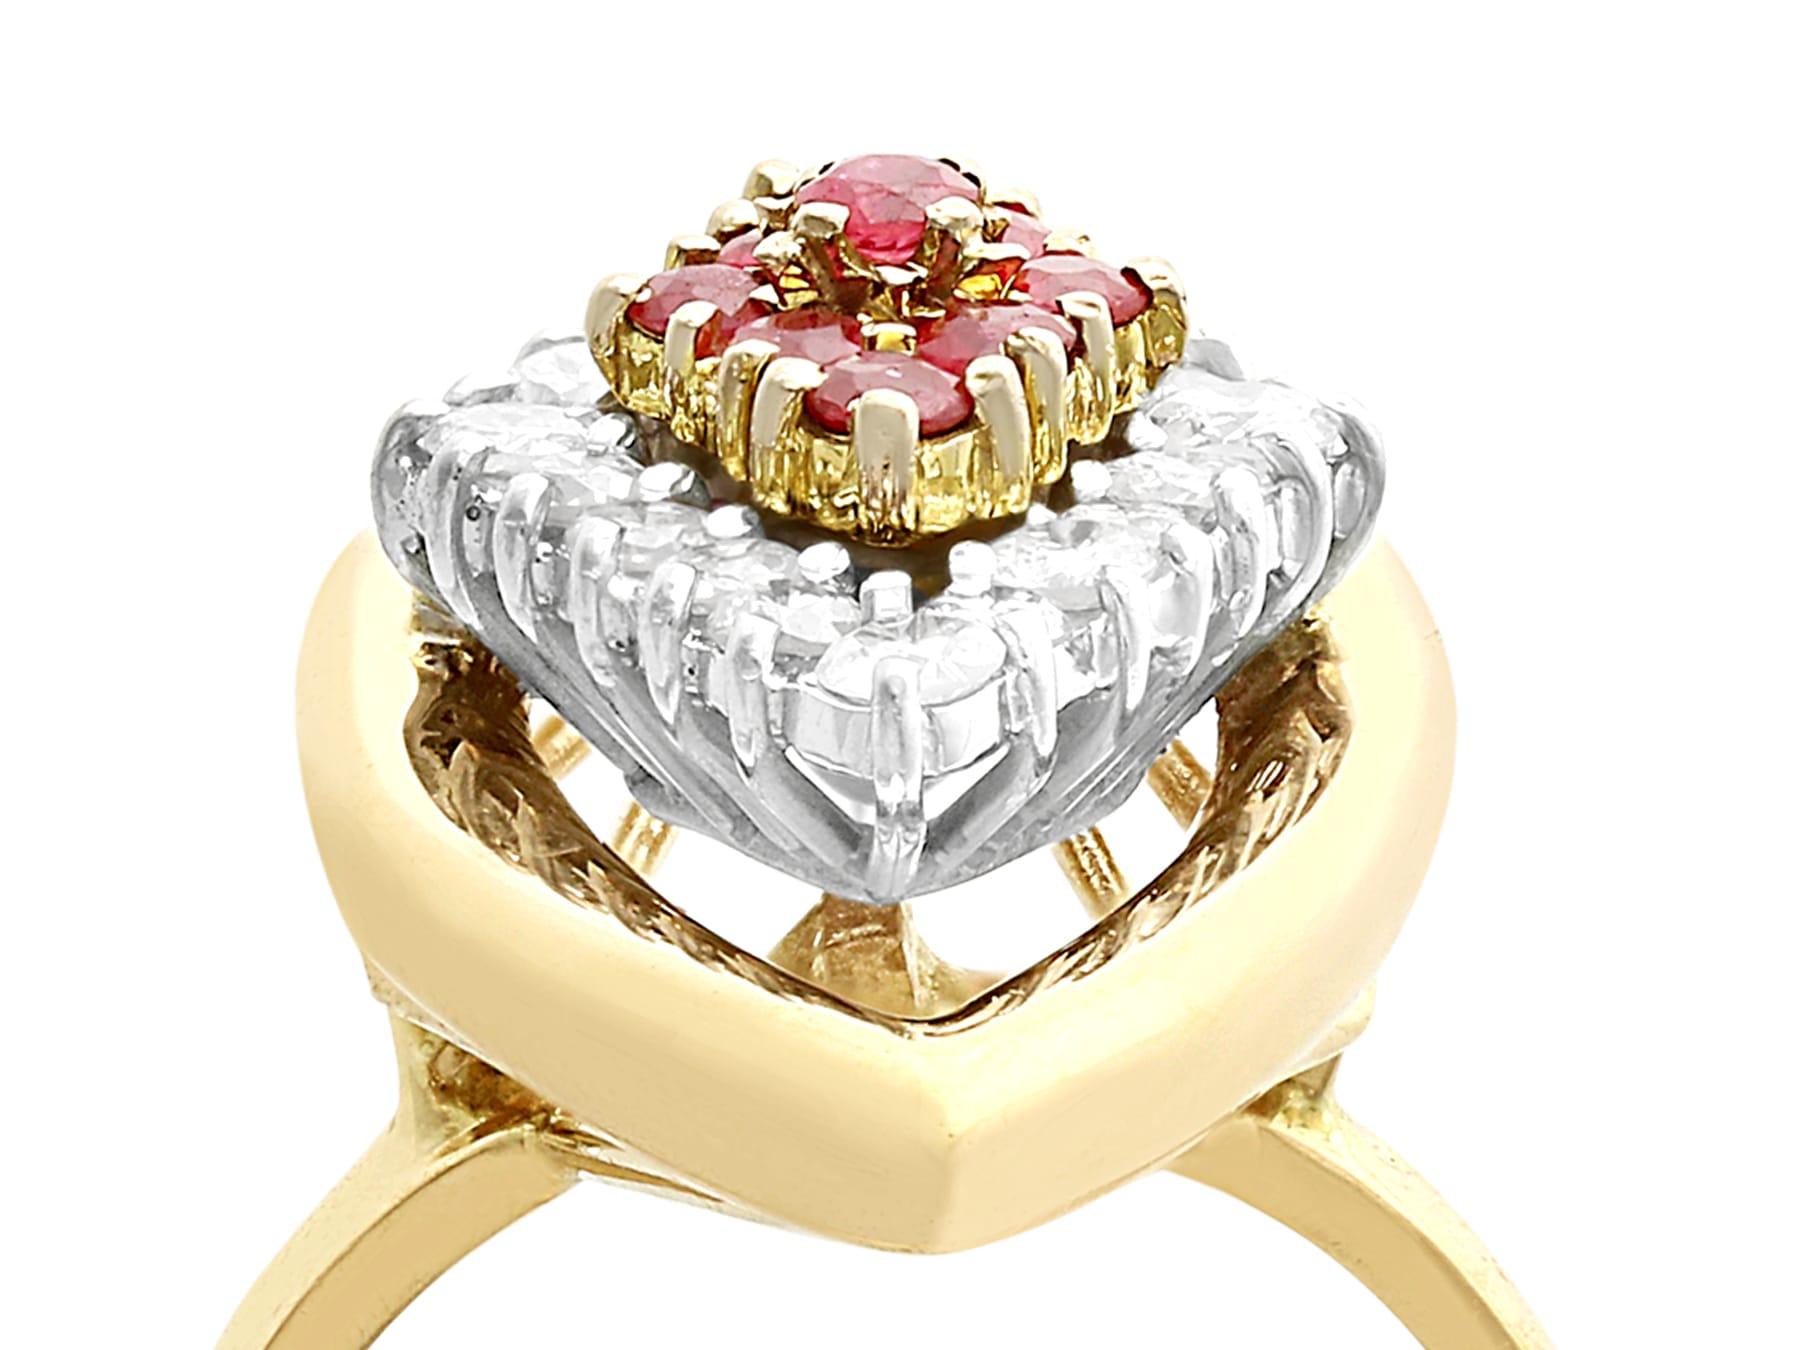 A fine and impressive vintage 0.40 carat natural ruby and 0.60 carat diamond, 18 karat yellow gold, 18 karat white gold set dress ring; part of our vintage jewelry and estate jewelry collections.

This fine vintage ruby cocktail ring has been